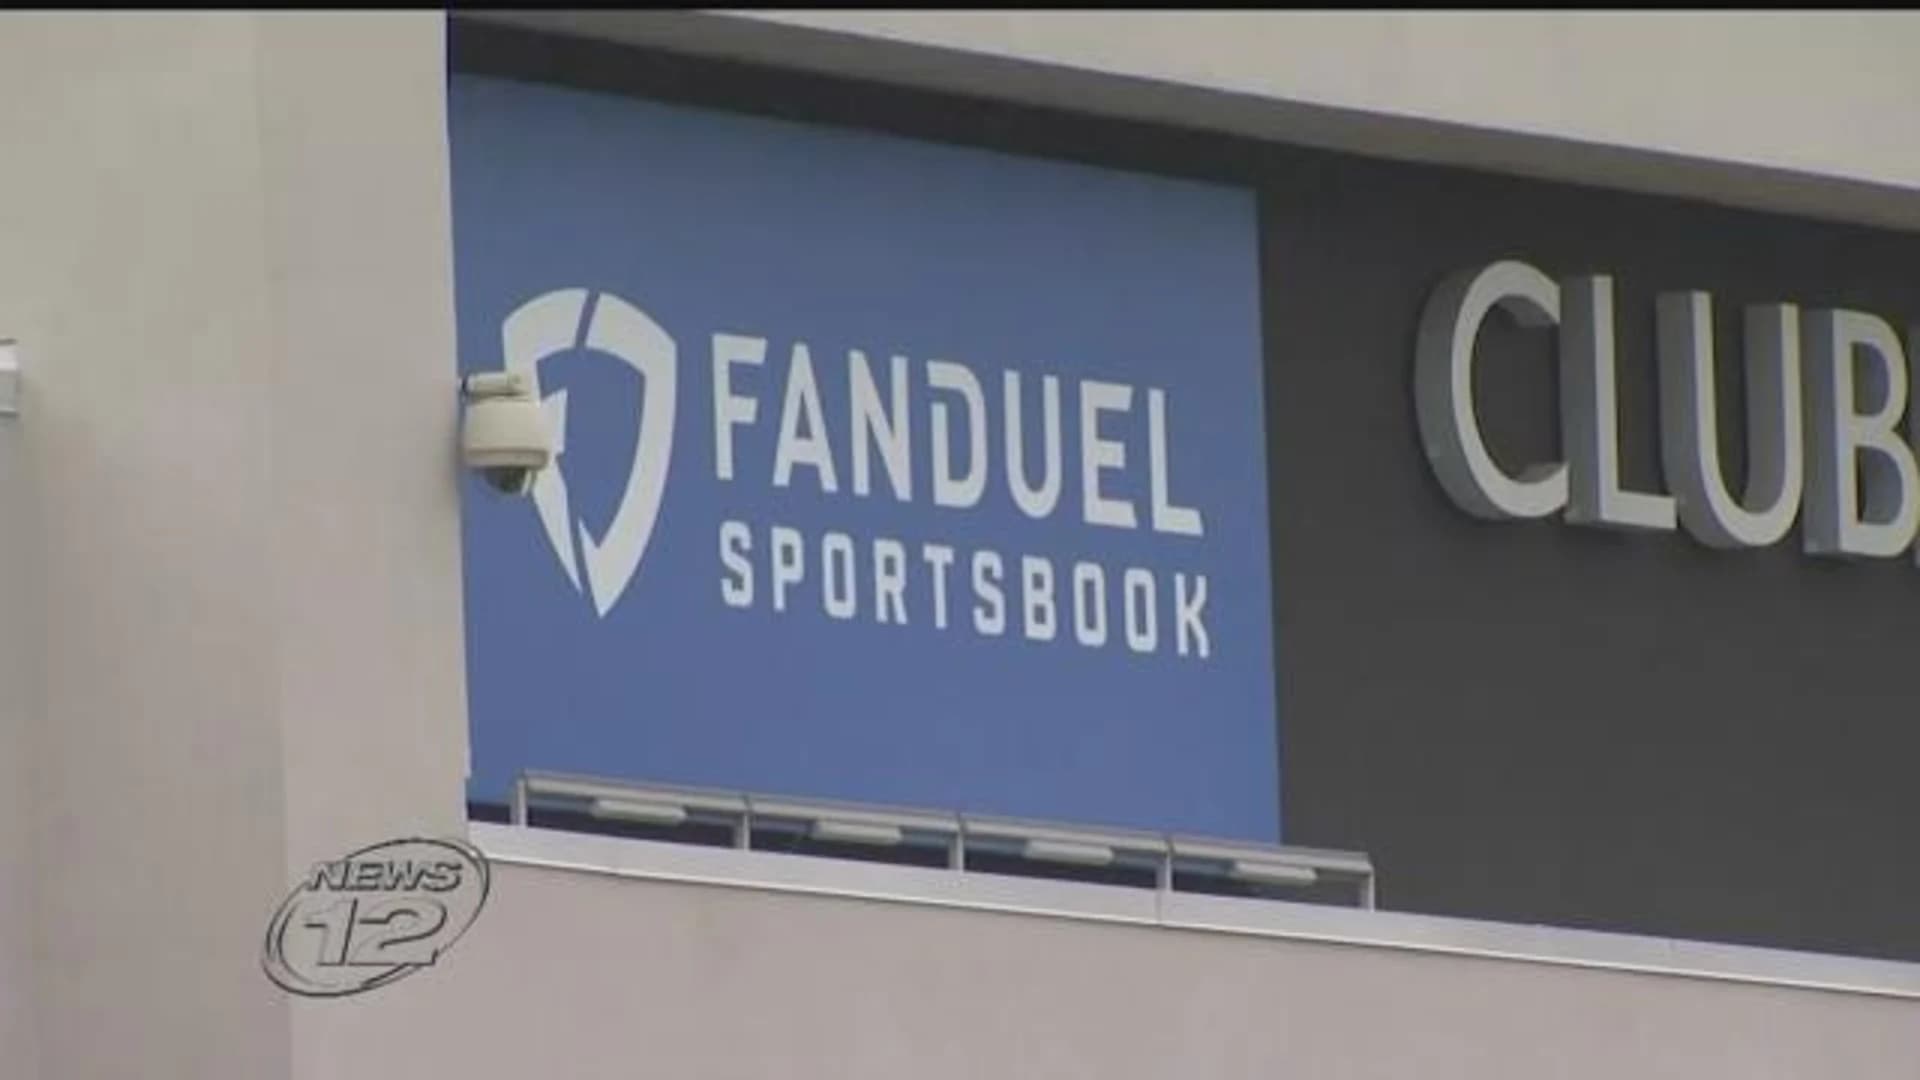 State Division of Gaming investigates FanDuel betting glitch